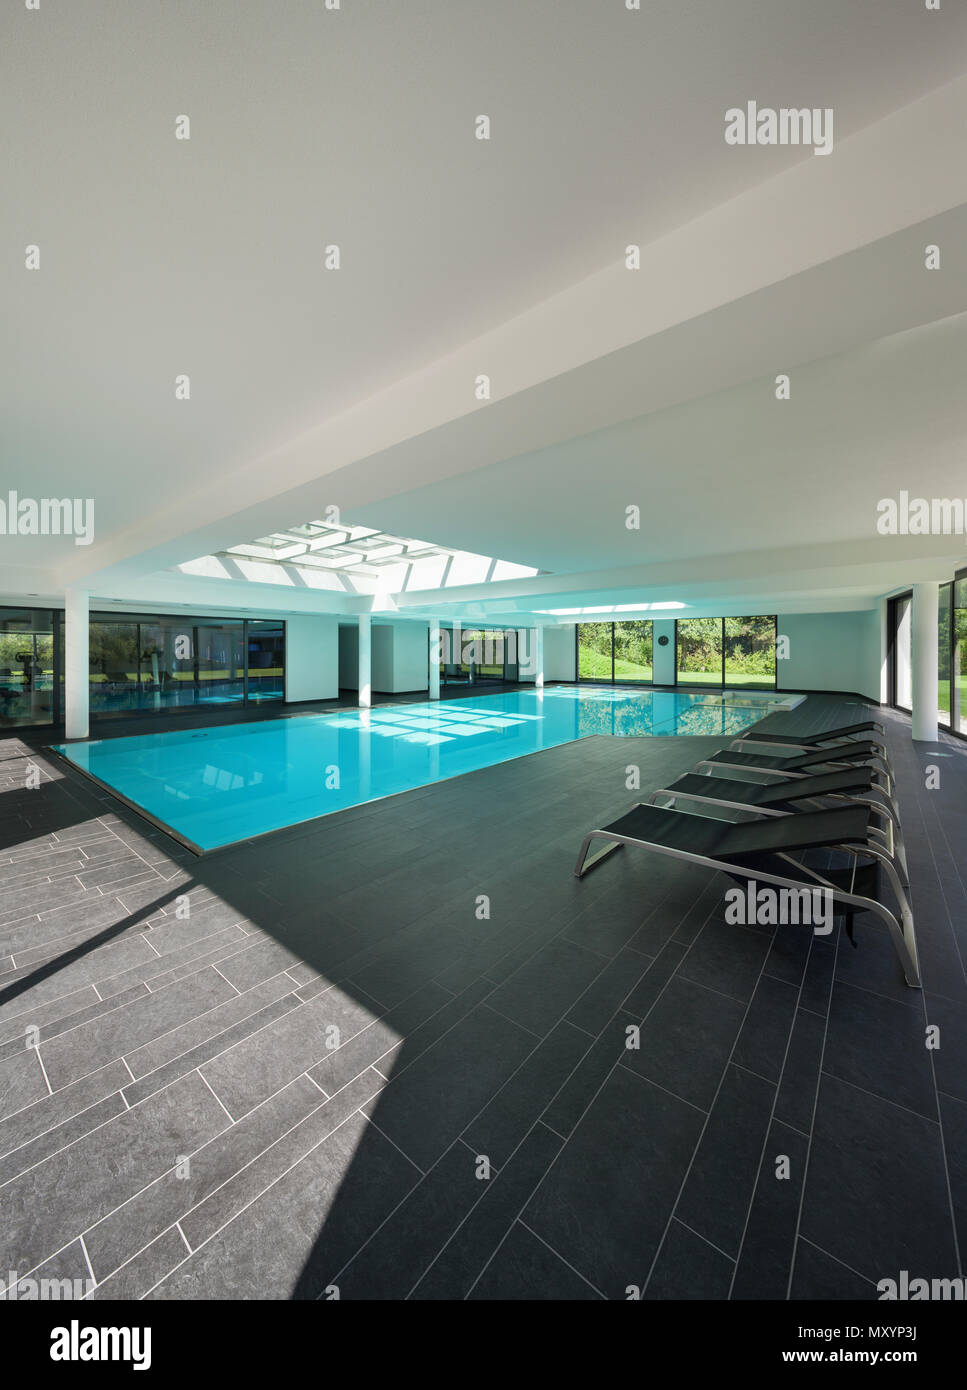 indoor swimming pool of a modern house with spa Stock Photo